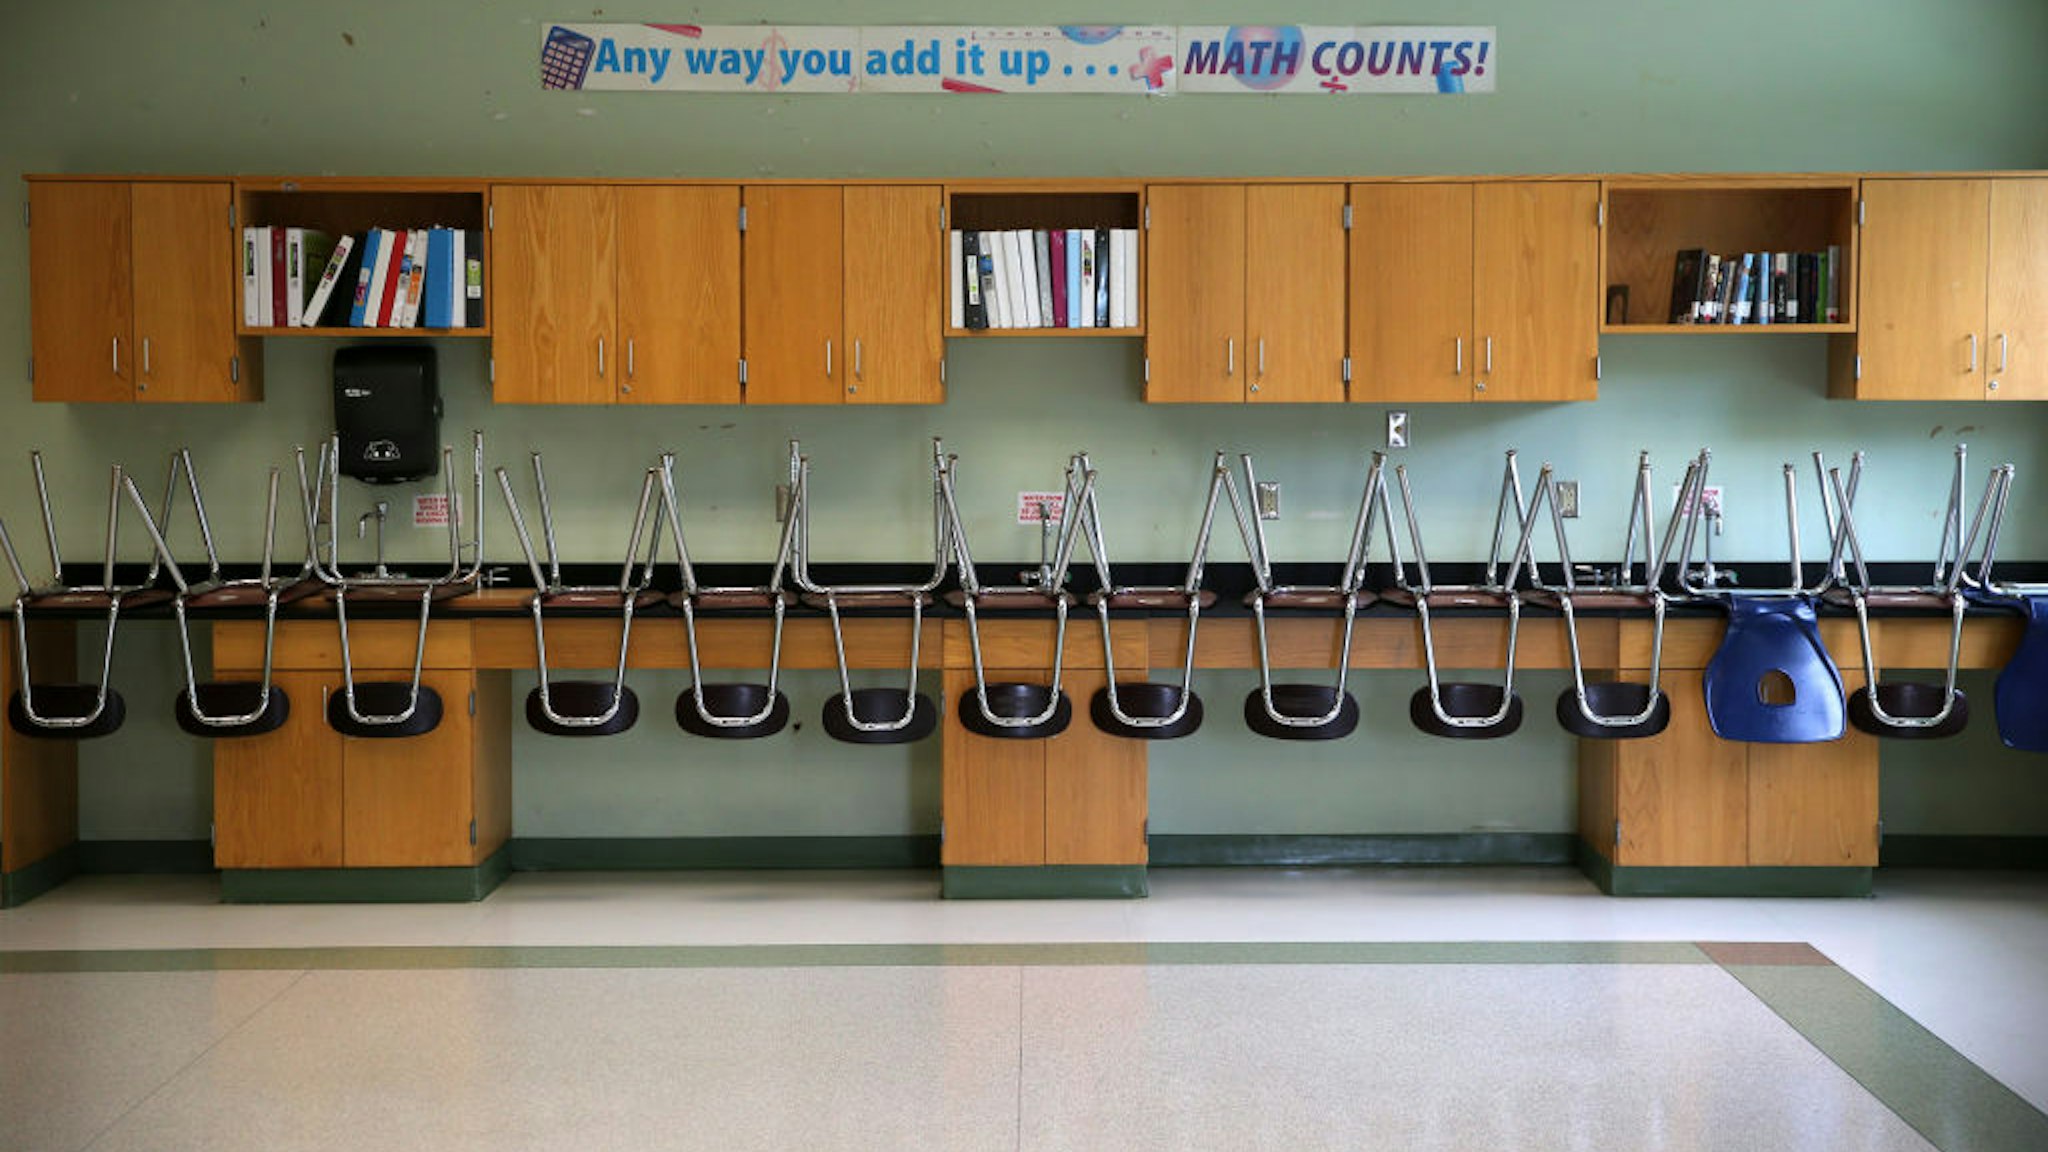 BOSTON - JULY 11: A finished clean room with stacked chairs in the science room at the Mildred Avenue K-8 School building in Boston's Mattapan, which were being cleaned for the reopening of school on July 9, 2020. Many measures are being taken by school systems to keep students safe from the COVID-19 pandemic including placing social distancing markers on the floors, increasing hand sanitizer stations, and increased cleaning. (Photo by David L. Ryan/The Boston Globe via Getty Images)